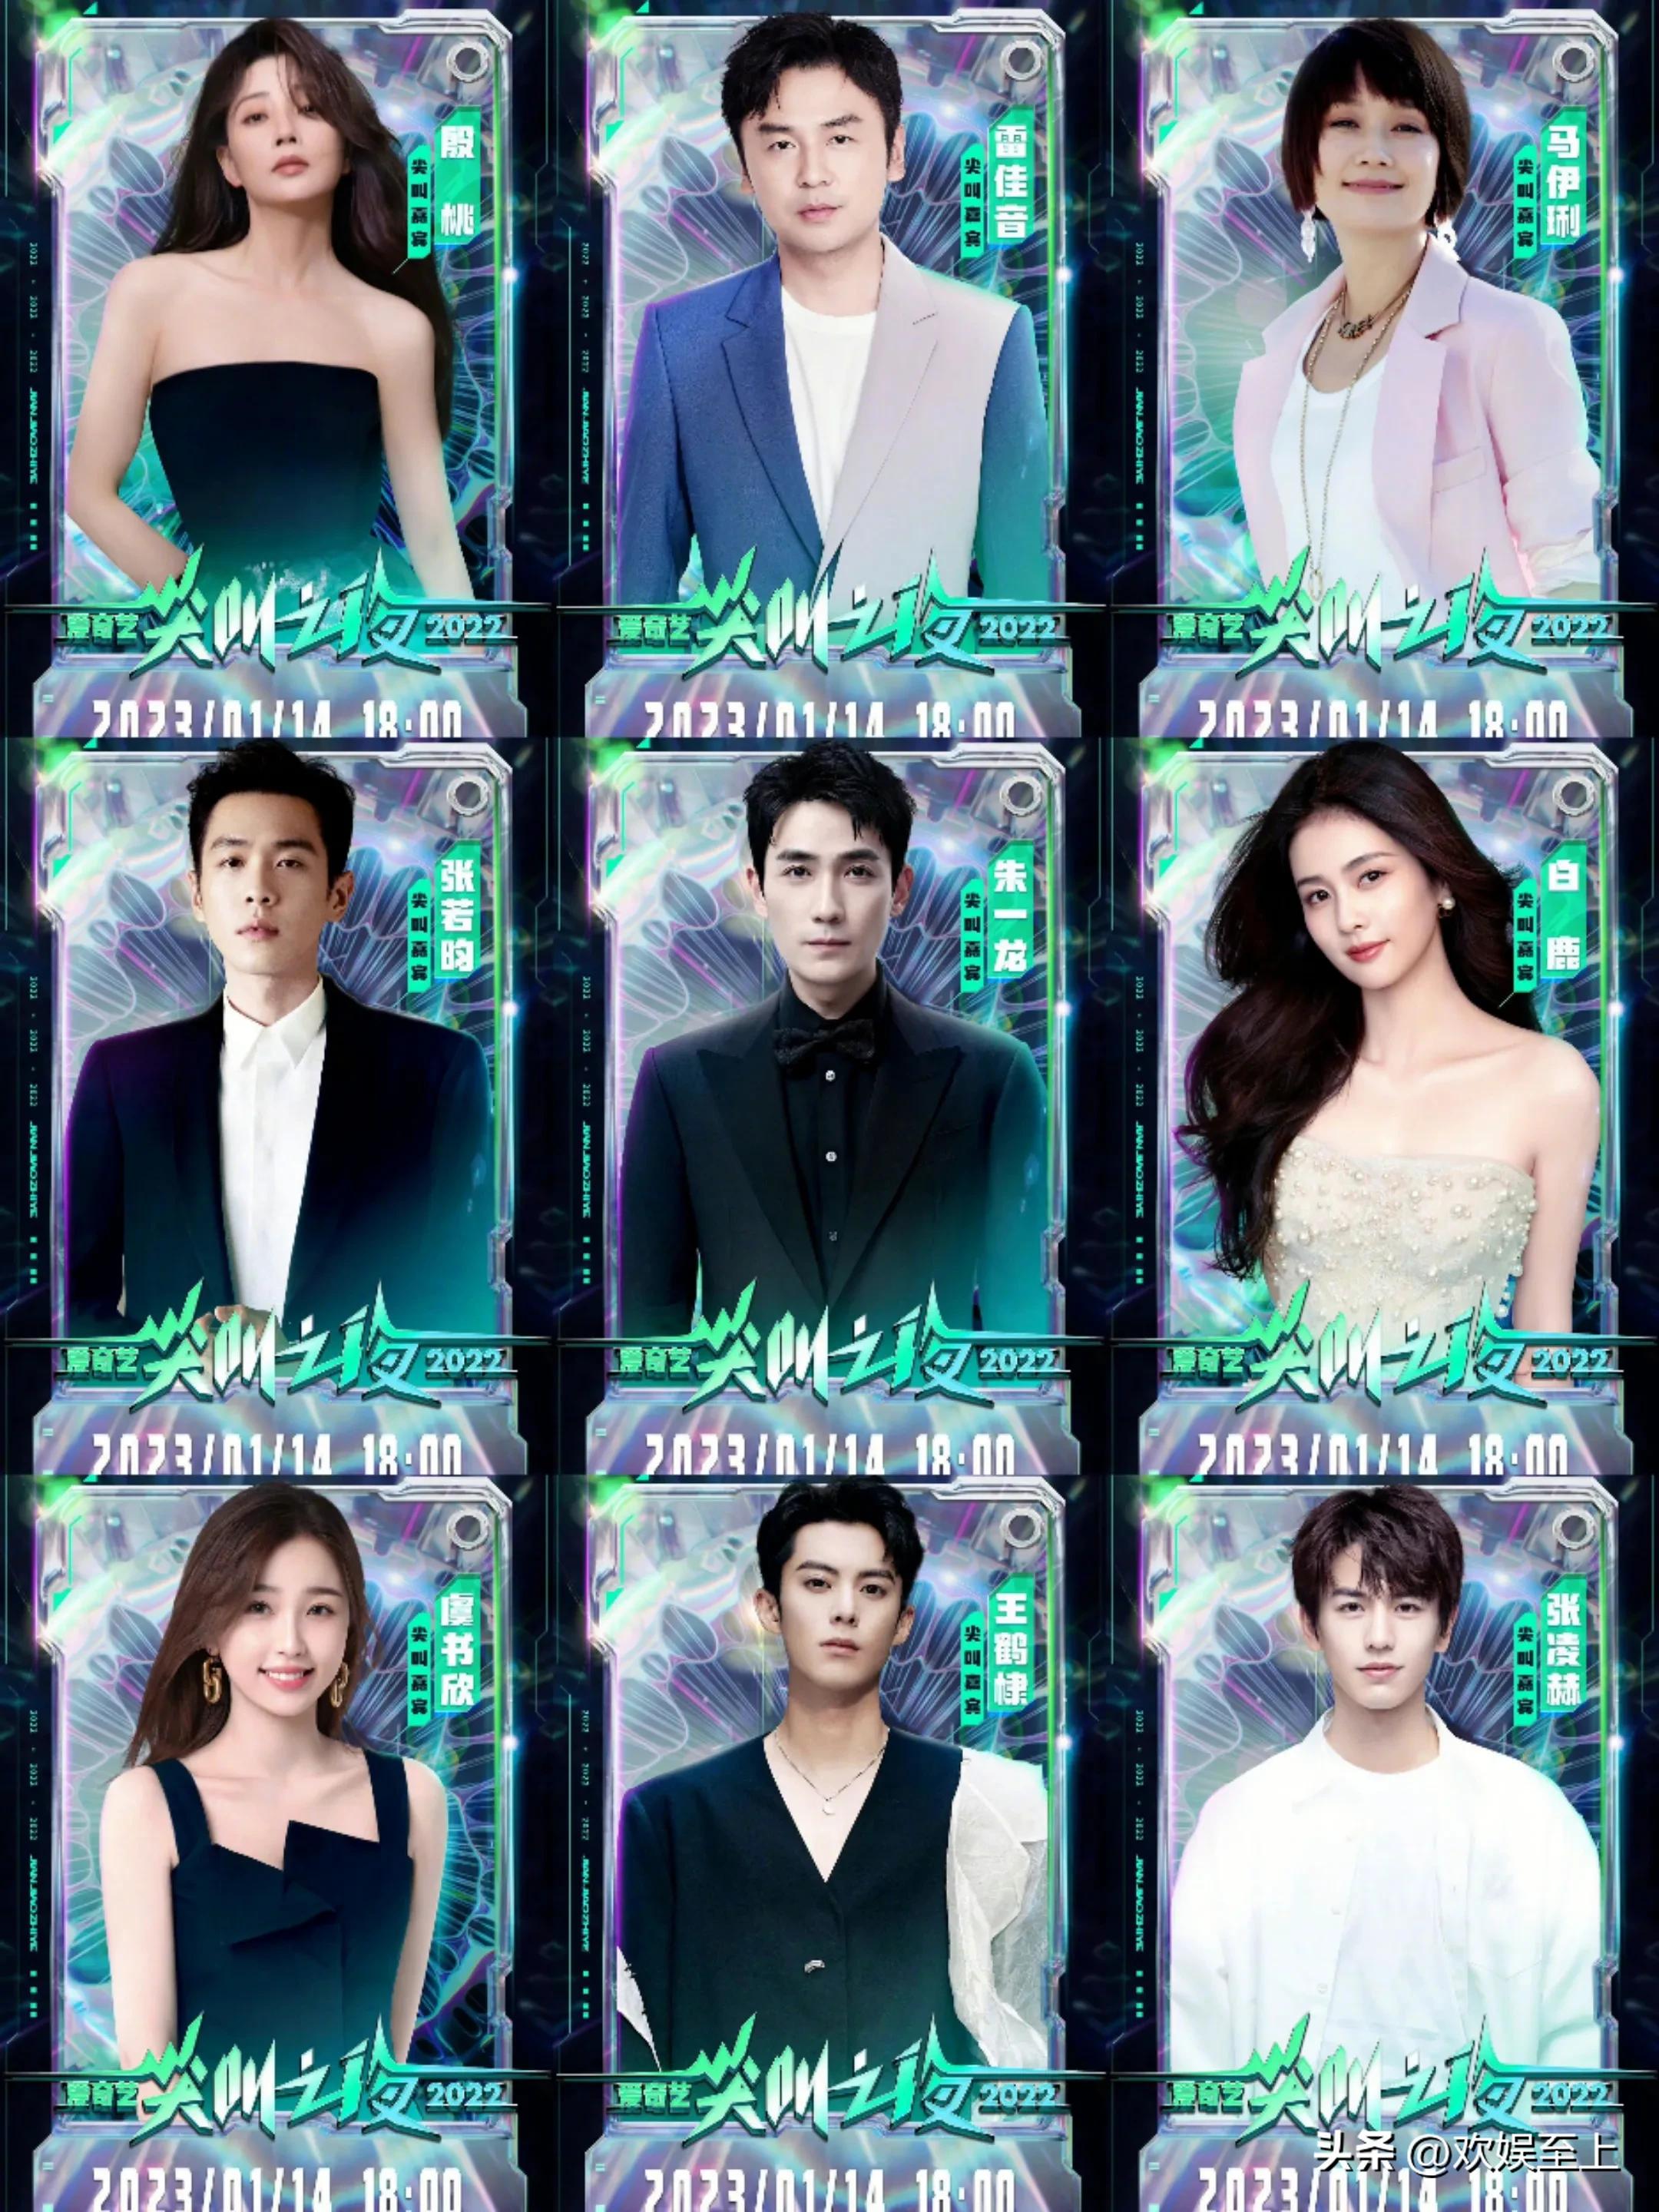 The 2022 iQIYI Scream Night lineup is officially announced, who are you